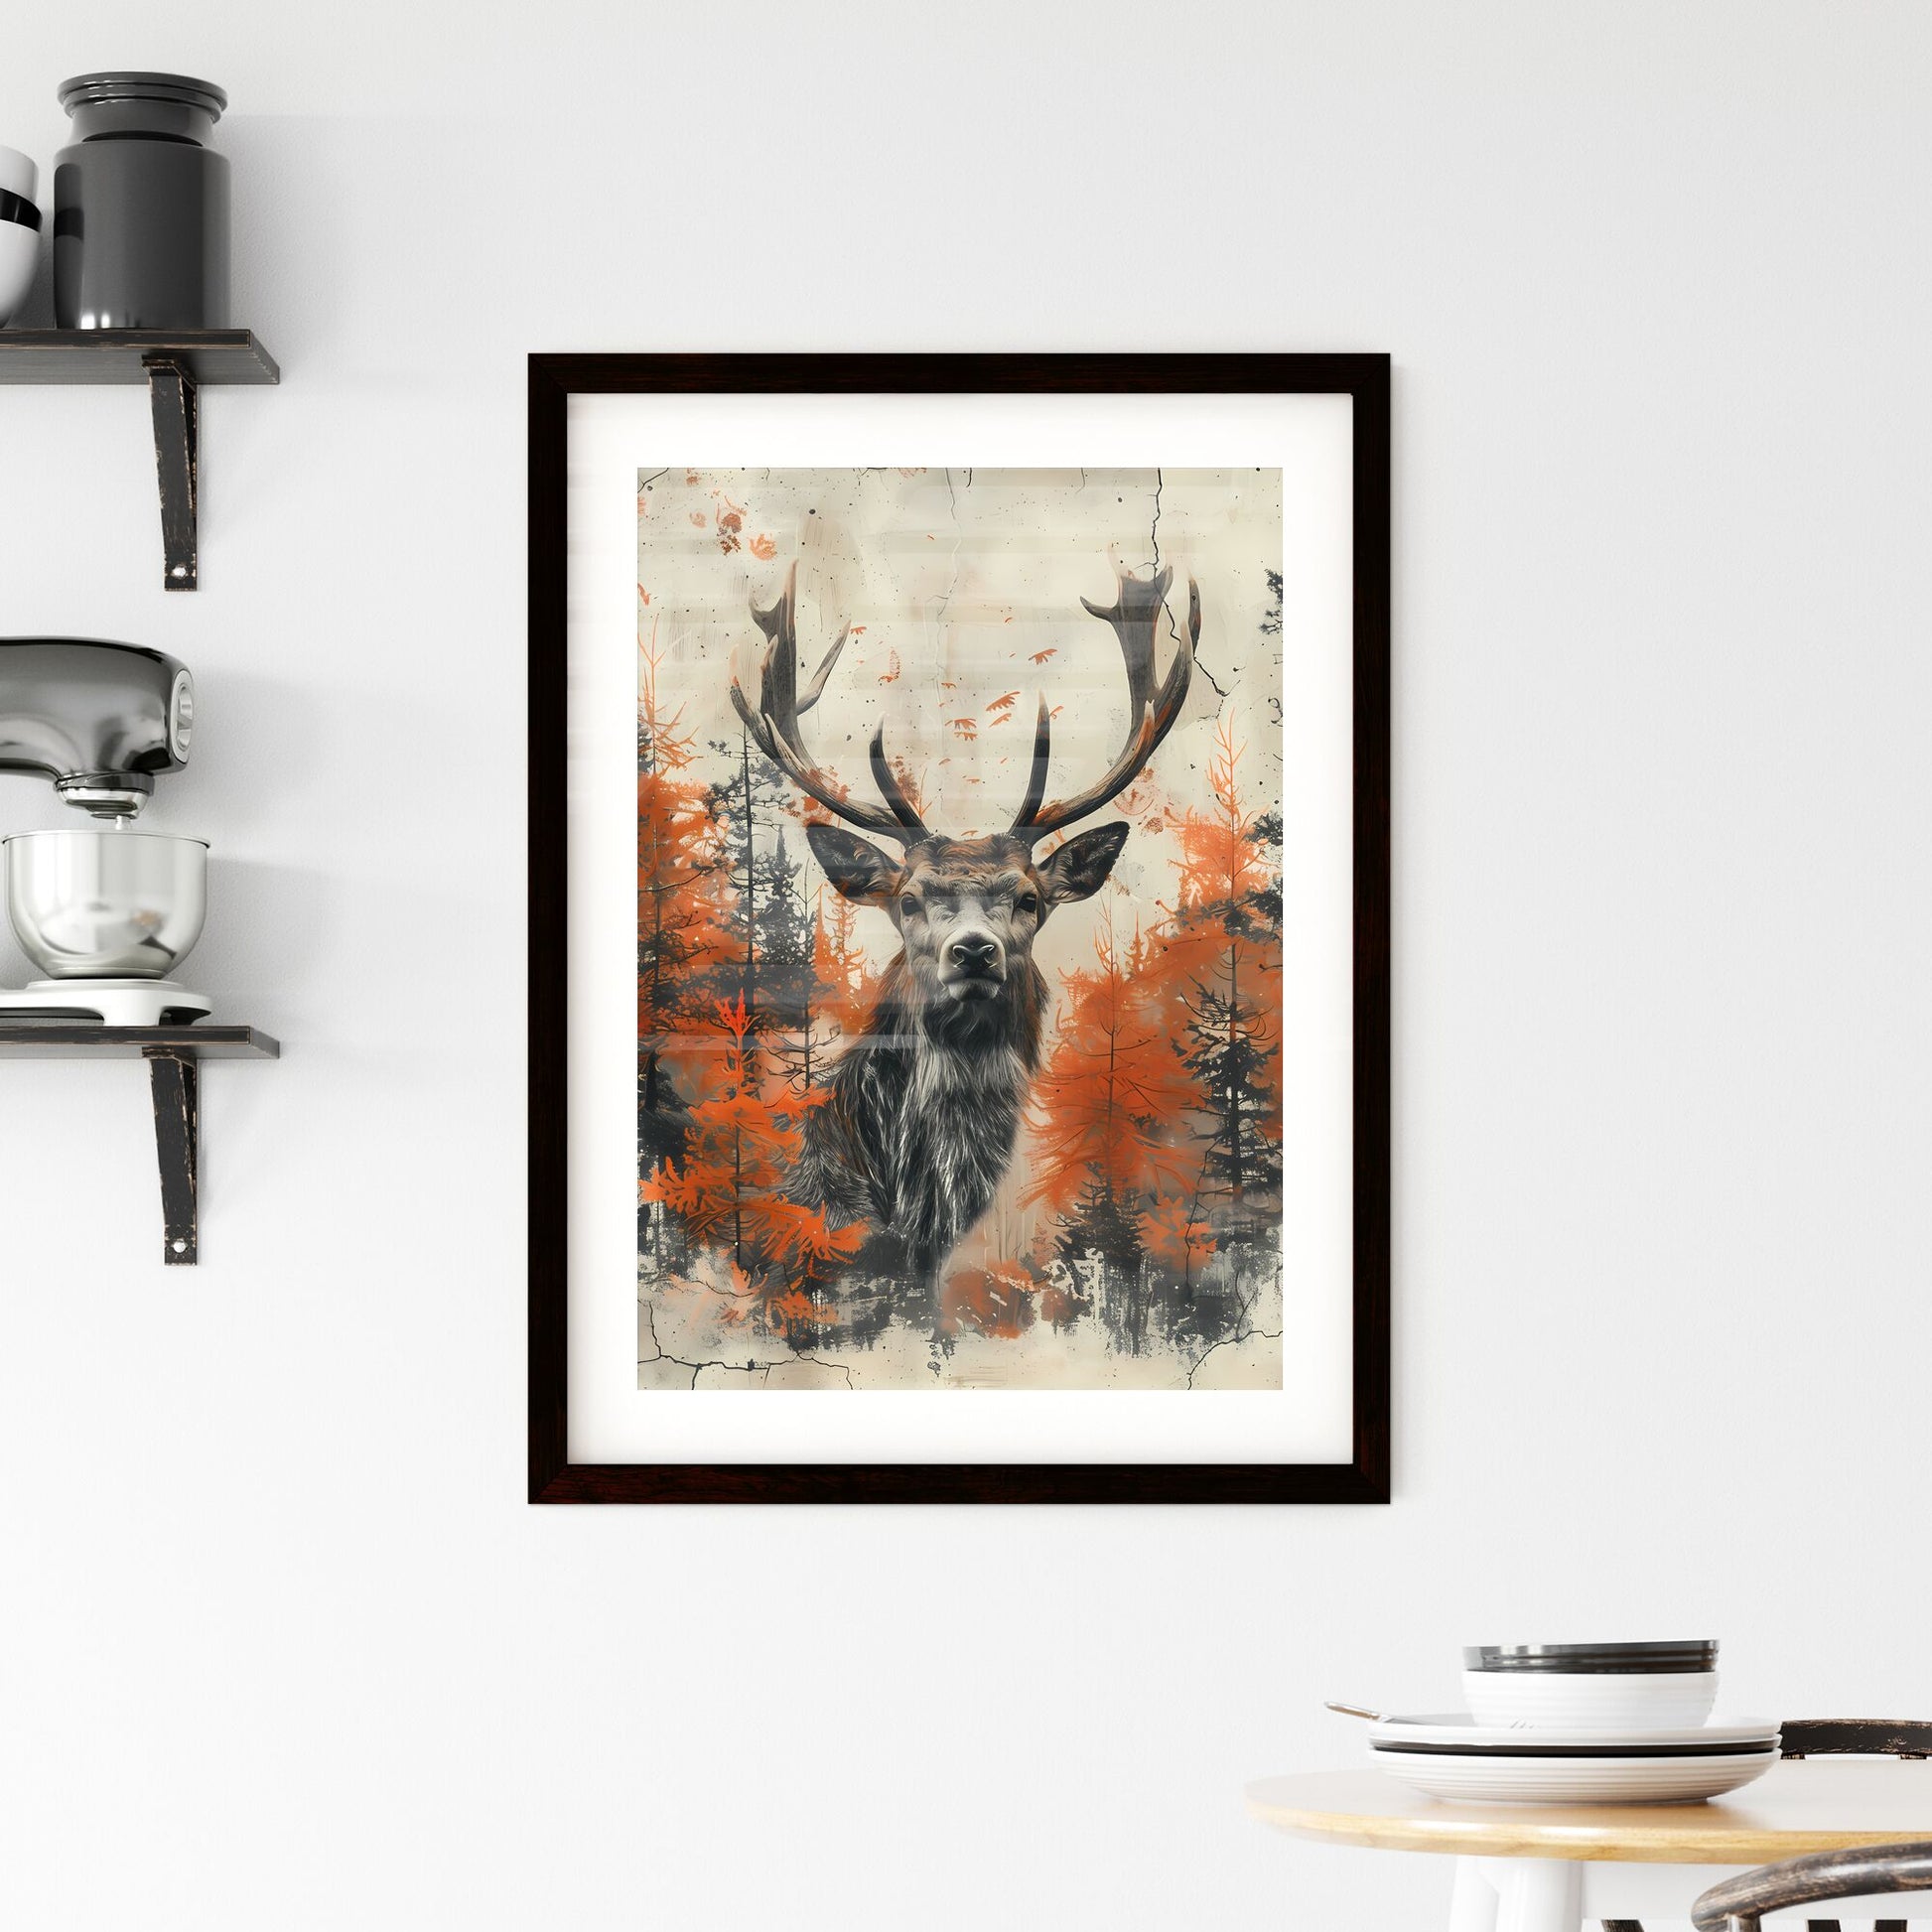 Intricate Baroque Deer Painting: Vibrant Artwork Depicting Stag in Forest with Dynamic Composition Default Title